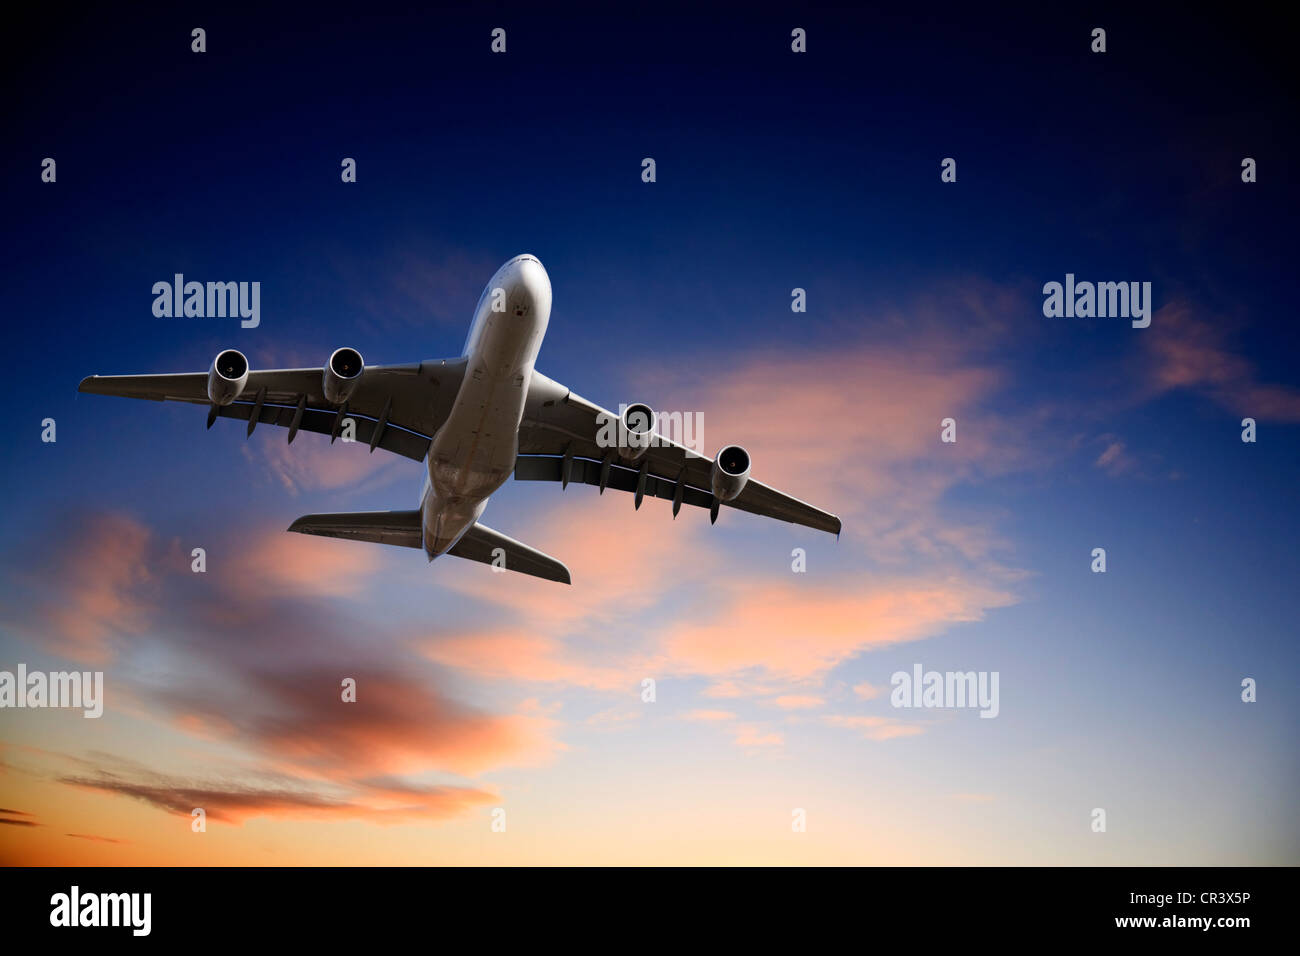 Airbus A380 jet aeroplane taking off in bright dramatic twilight sunset moody sky. Stock Photo